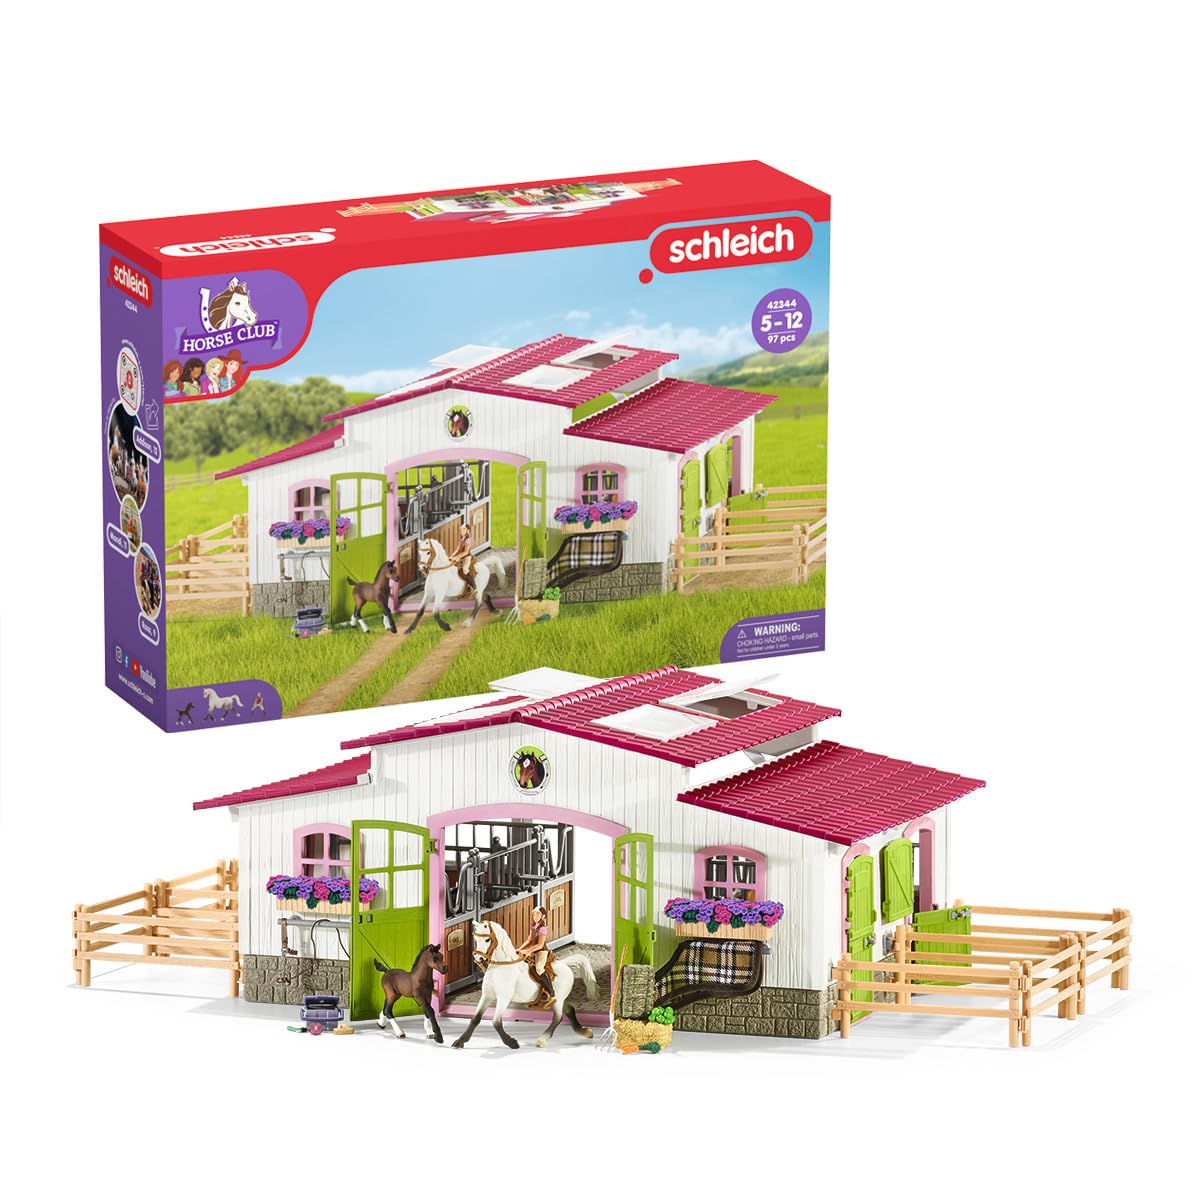 Schleich Horse Club, Horse Gifts for Girls and Boys, Riding Center with Rider and Horses, Horse Stable Horse Set with Horse Toys, 97 pieces